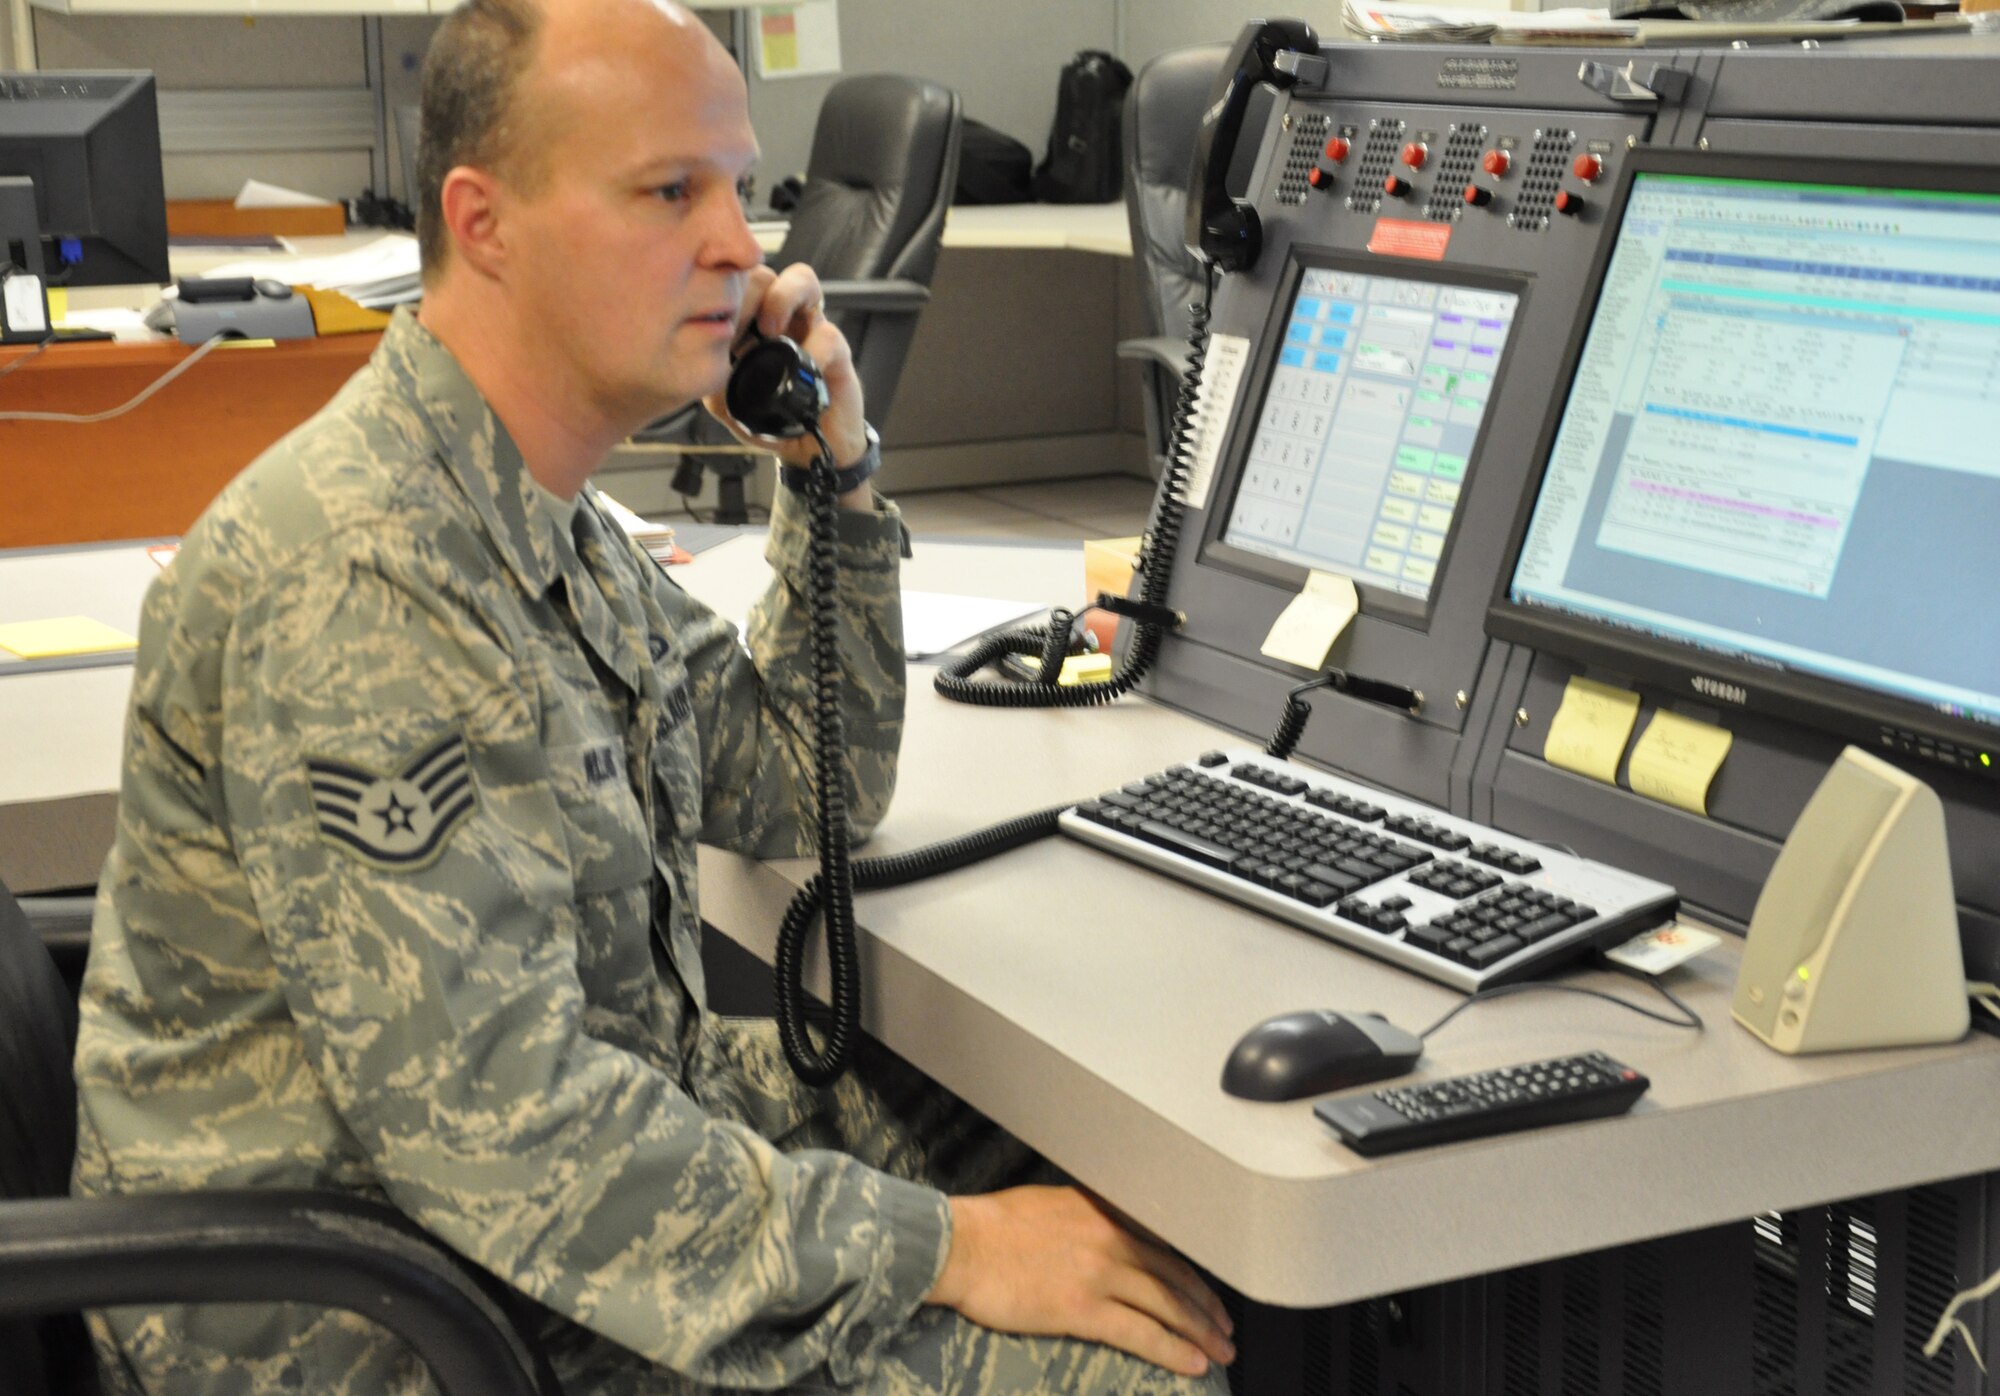 WRIGHT-PATTERSON AIR FORCE BASE, Ohio - Staff Sgt. Franklin Williams, 445th Airlift Wing Command Post controller, is the December Spotlight performer. (U.S. Air Force photo/Stacy Vaughn)